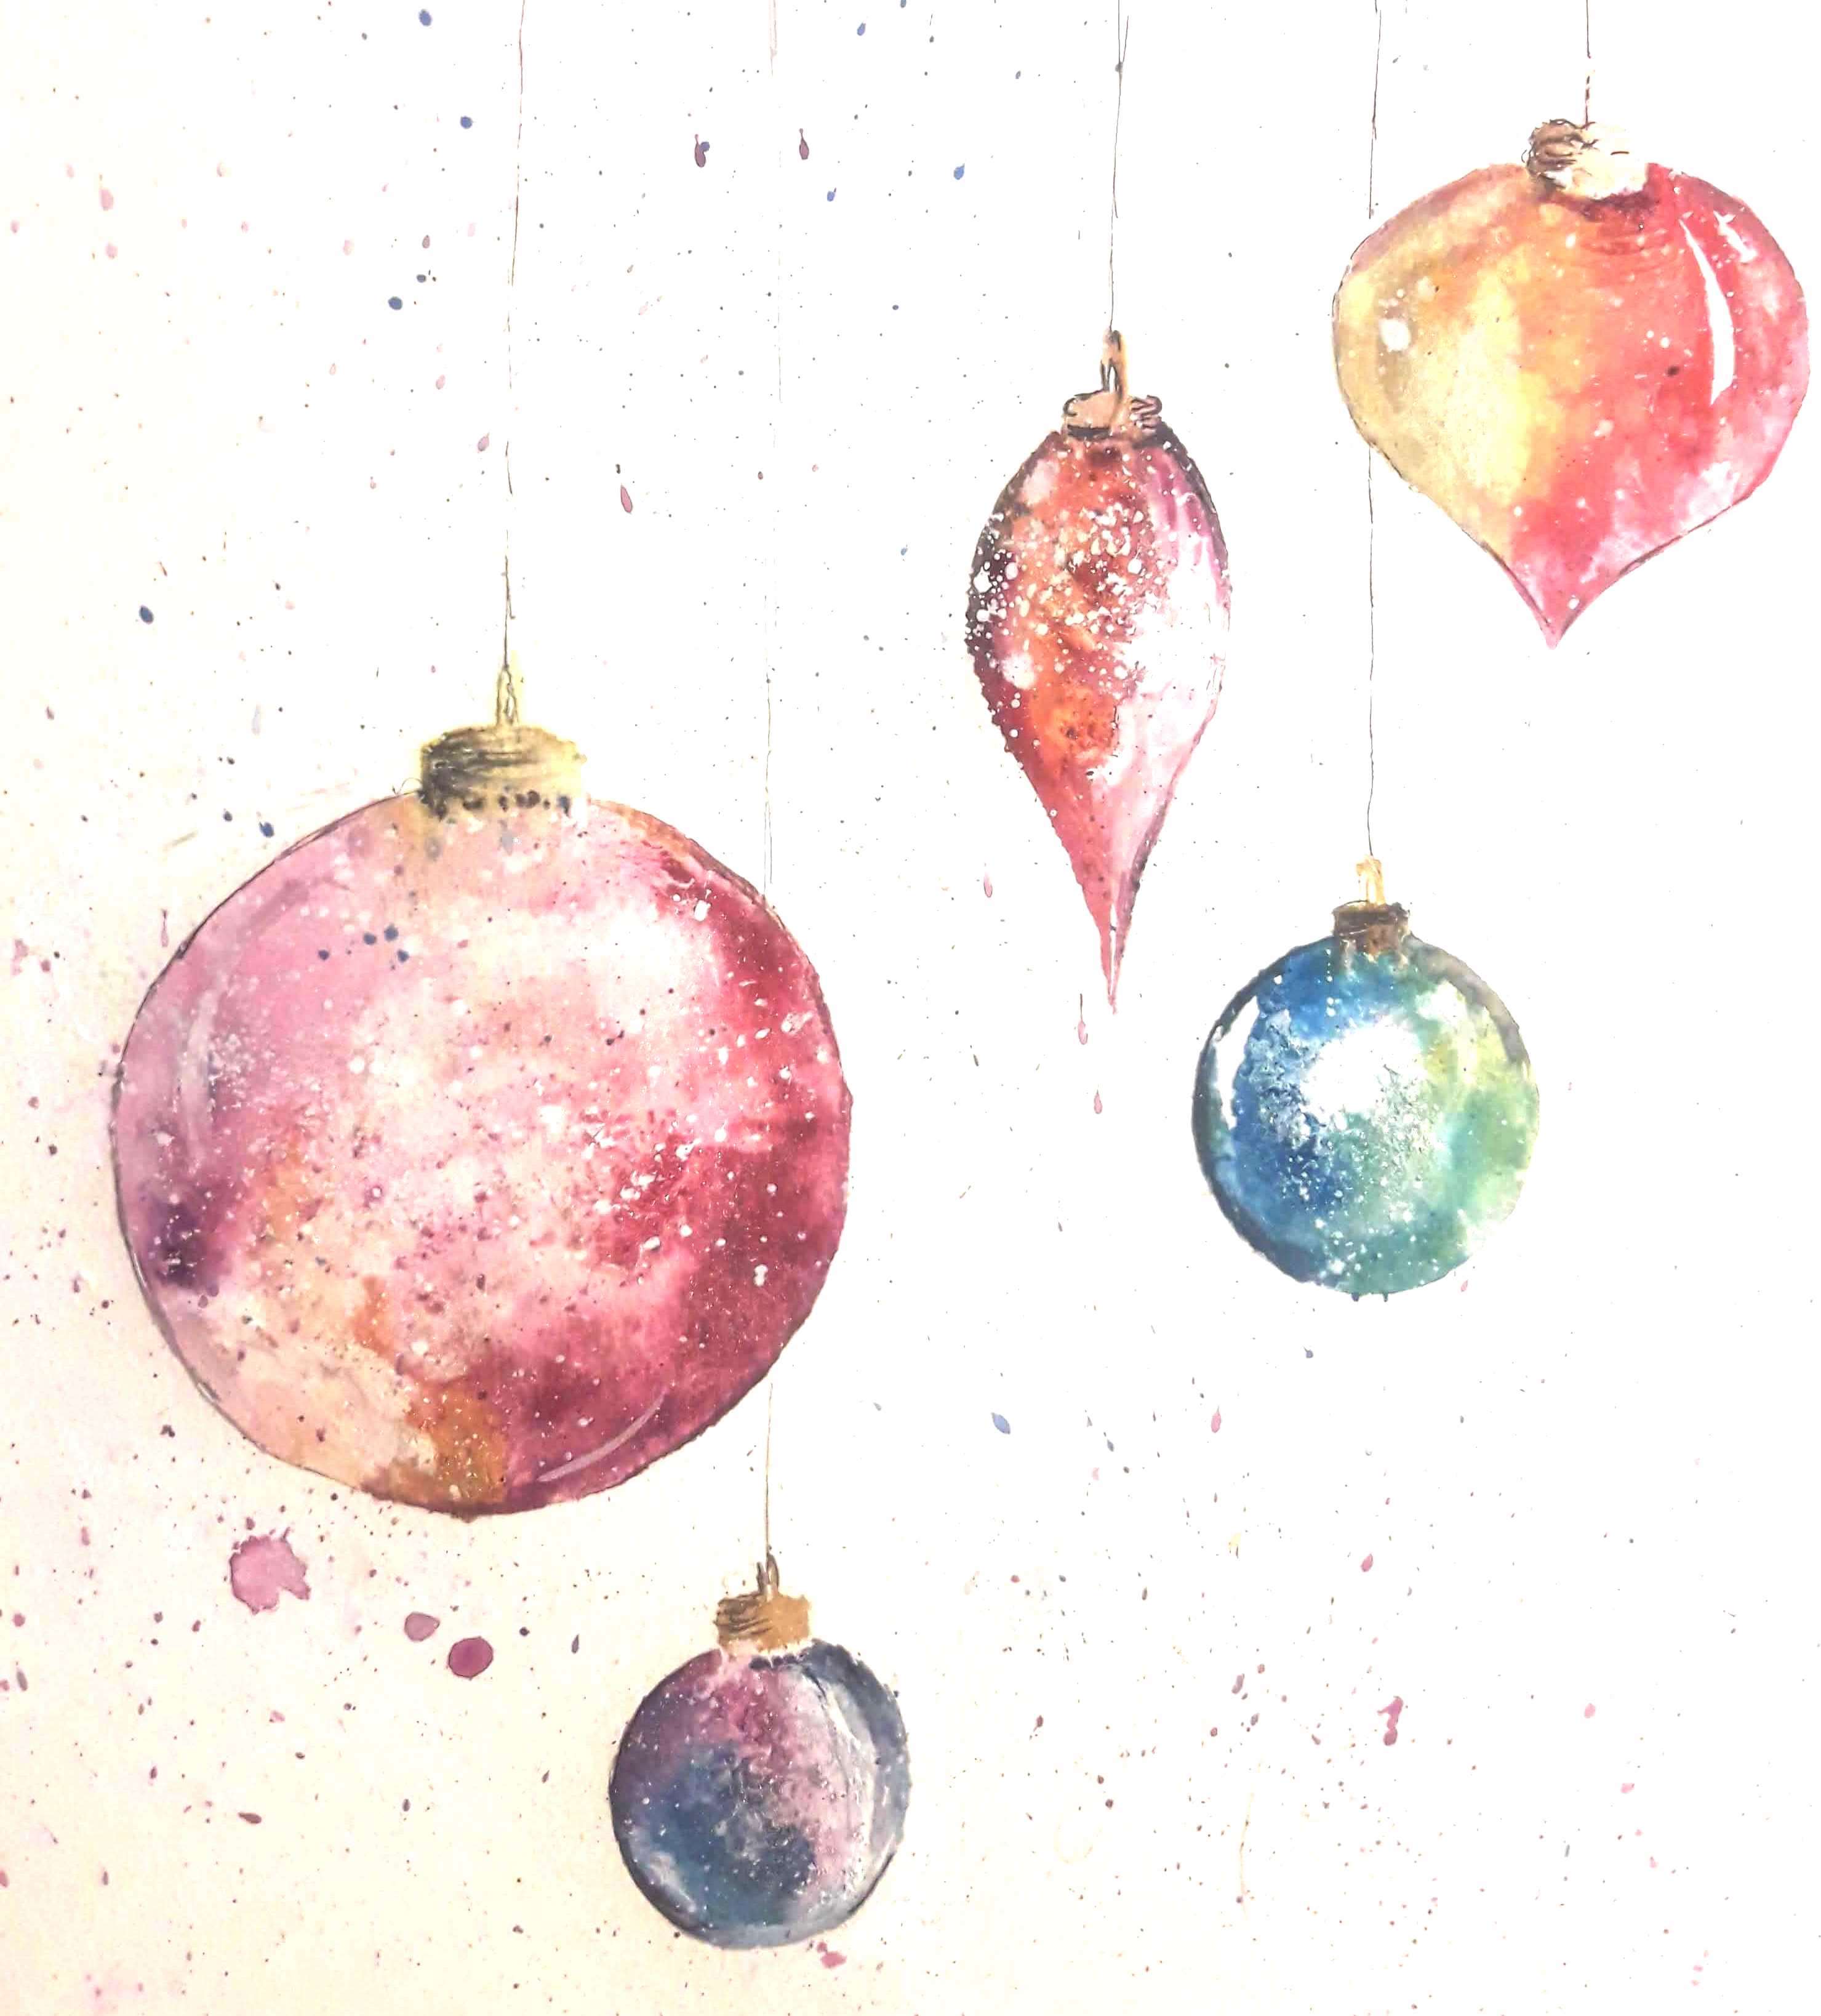 Discovering  'Pen & Wash' at Christmas with Margaret Jarvis